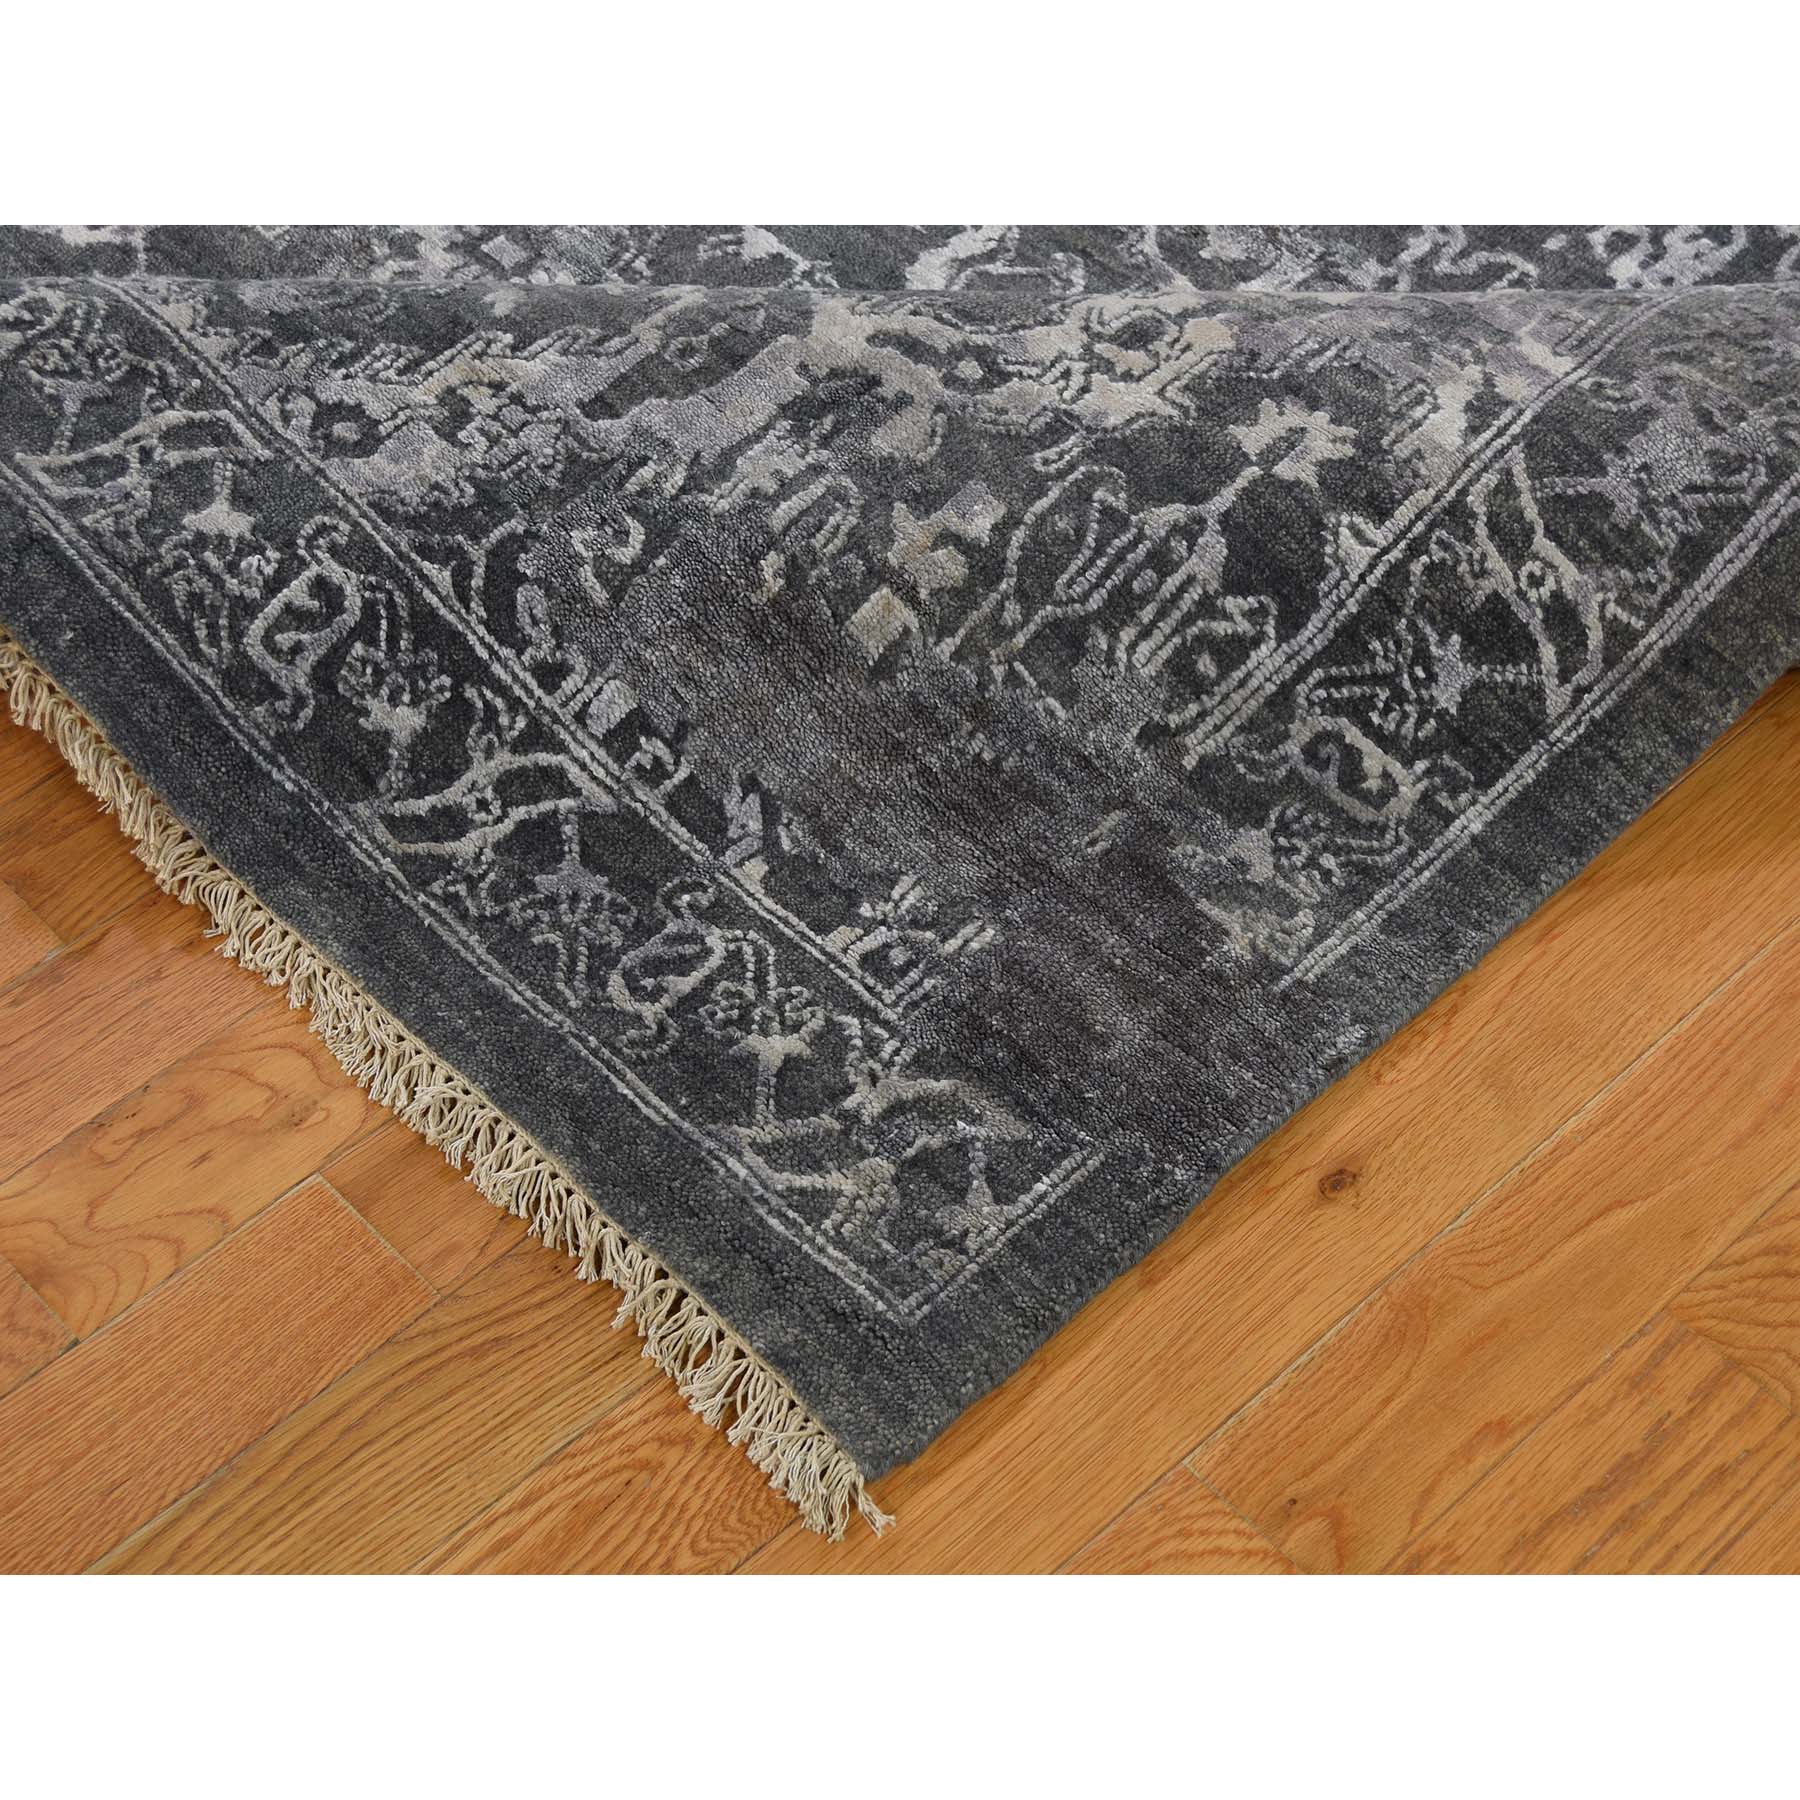 9-x11-9  Broken Persian Design Wool And Silk Hand-Knotted Oriental Rug 